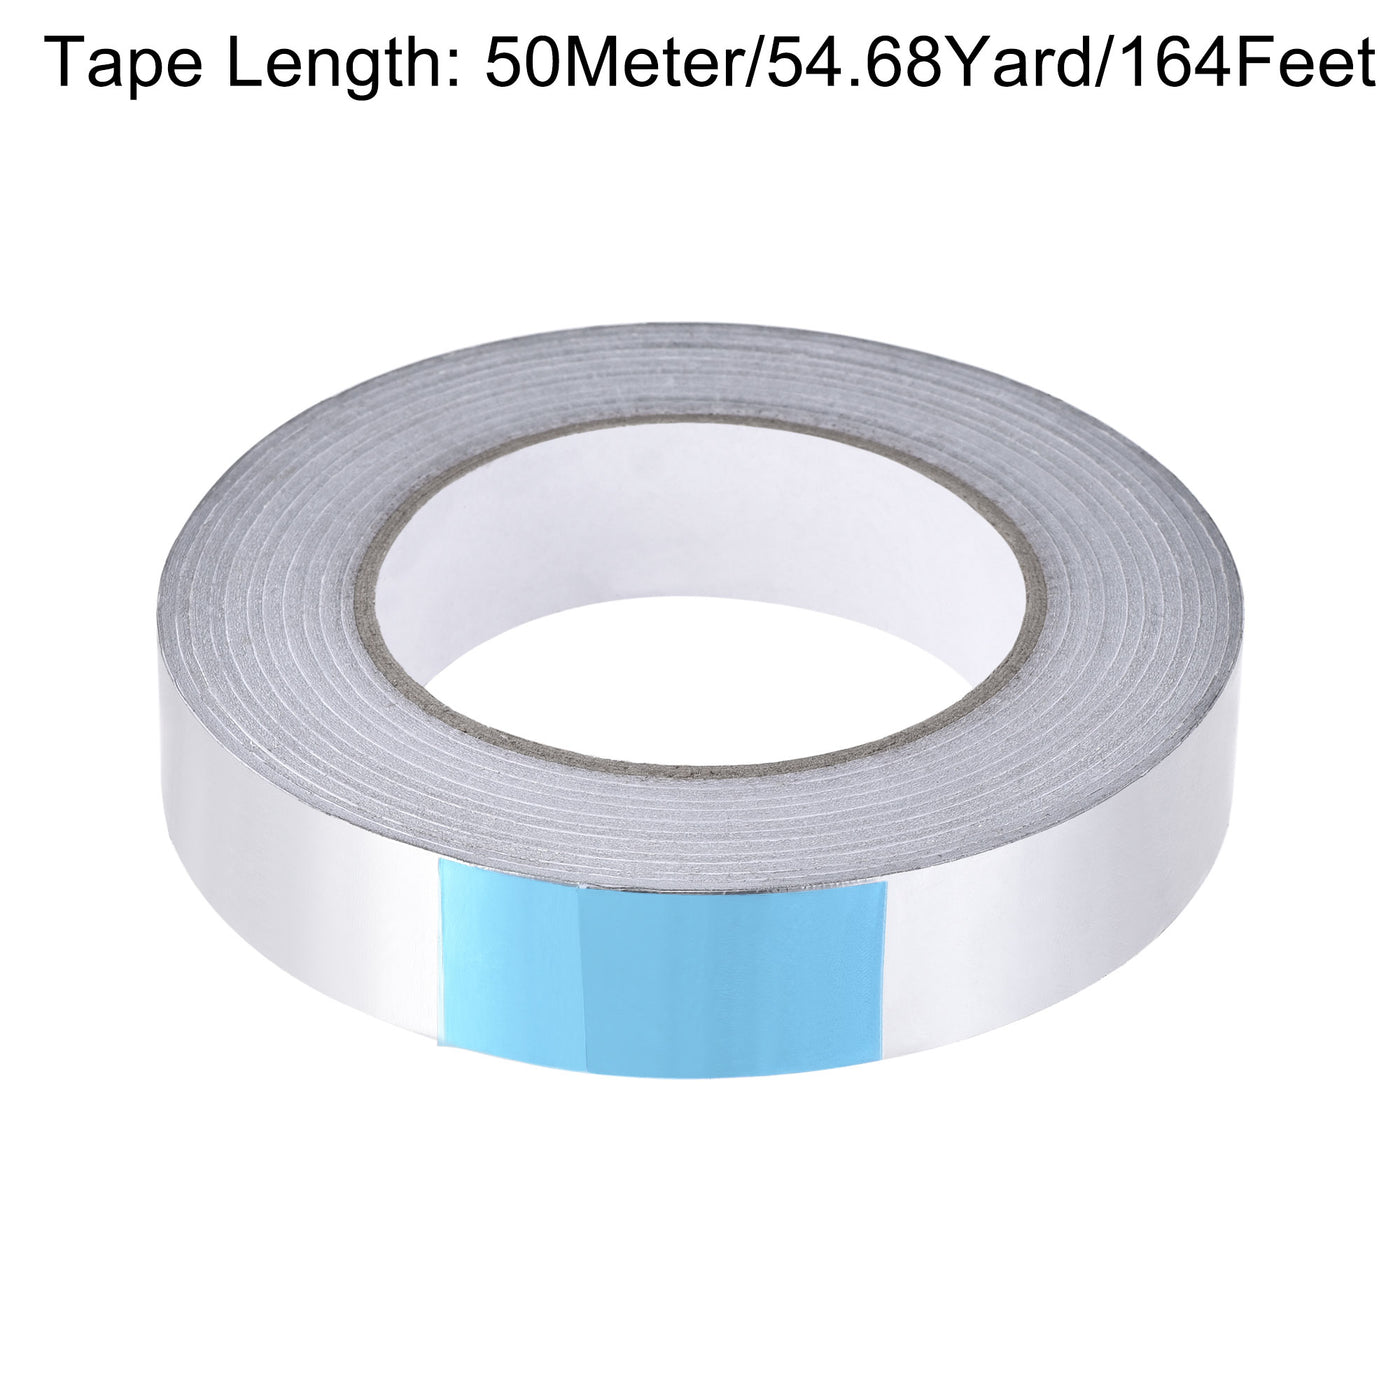 uxcell Uxcell Aluminum Foil Tape, 25mmx50m Self-adhesive Waterproof High Temperature Sealing Tapes for HVAC Duct Pipe Insulation